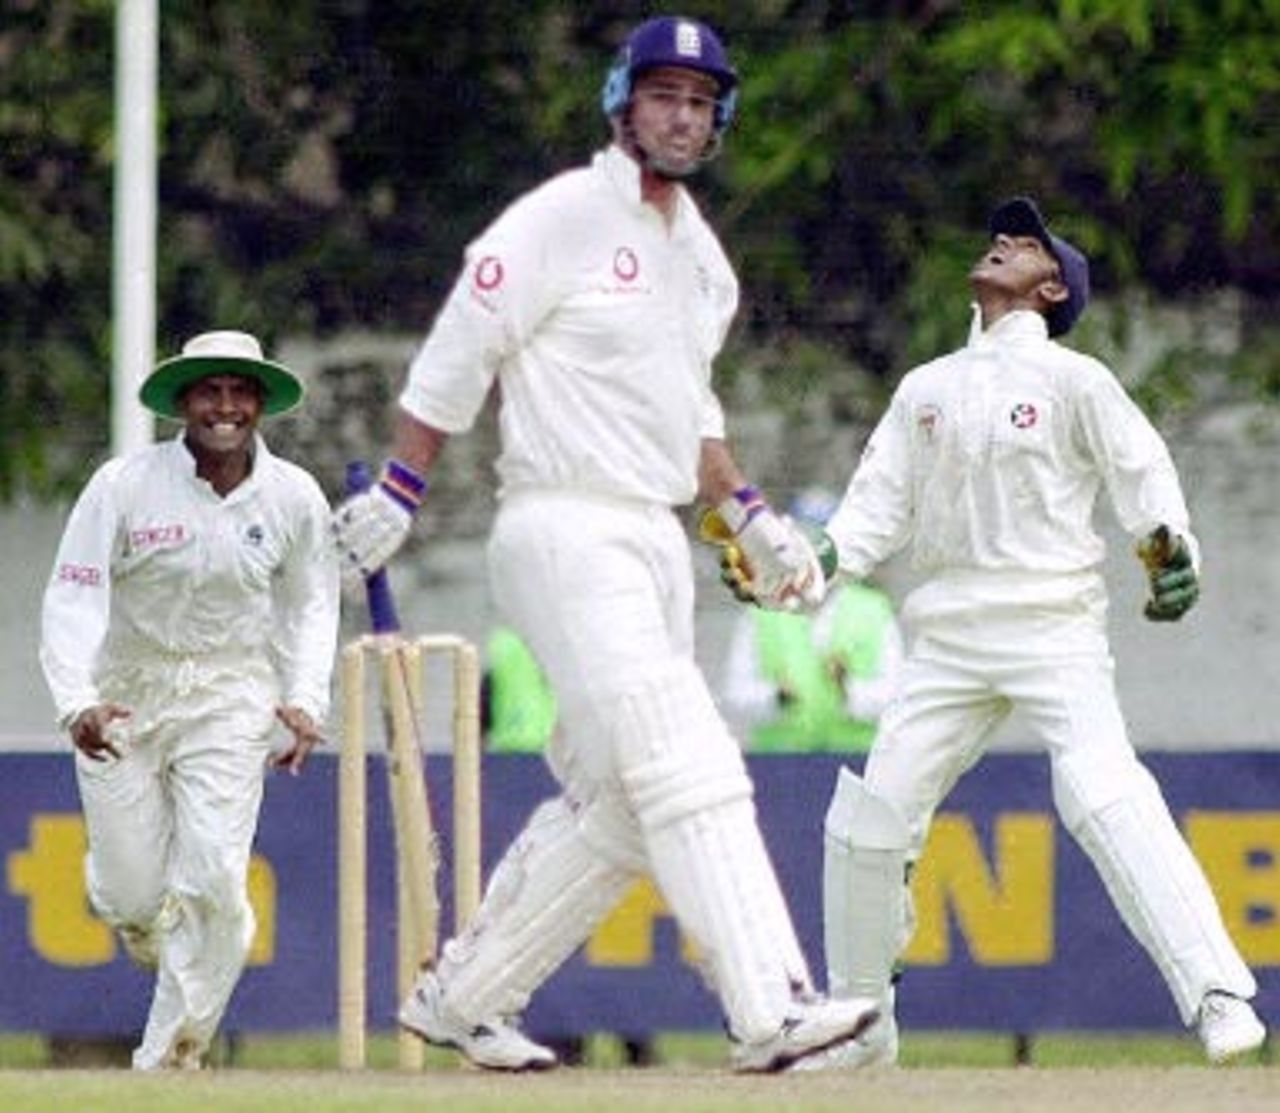 England batsman Graham Thorpe (C) prepares to leave the crease 08 February 2001 as Sri Lankan wicketkeeper Prasanna Jayawardena (R) celebrates his catch with fielder Hasha Thilakeratna (L) during a four-day match against a Sri Lanka Board President's XI held in Colombo. England will officially open their tour with a 22 February Test match.